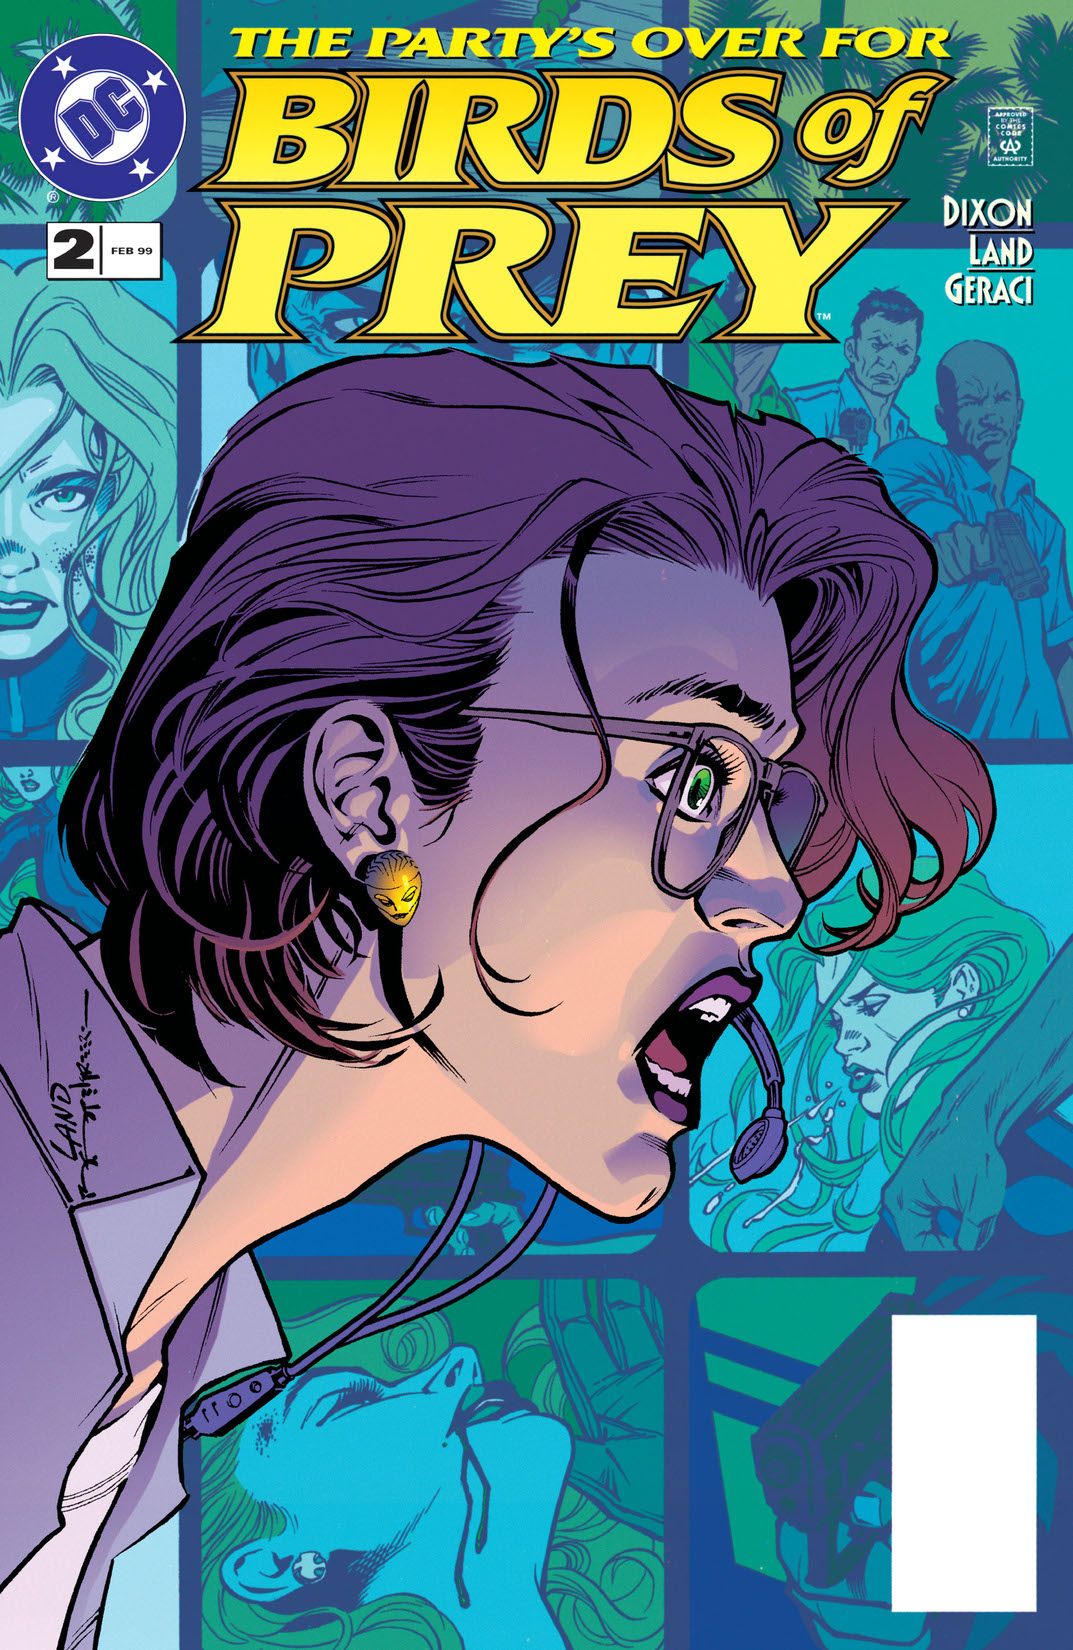 Birds of Prey (1998-) #2 preview images